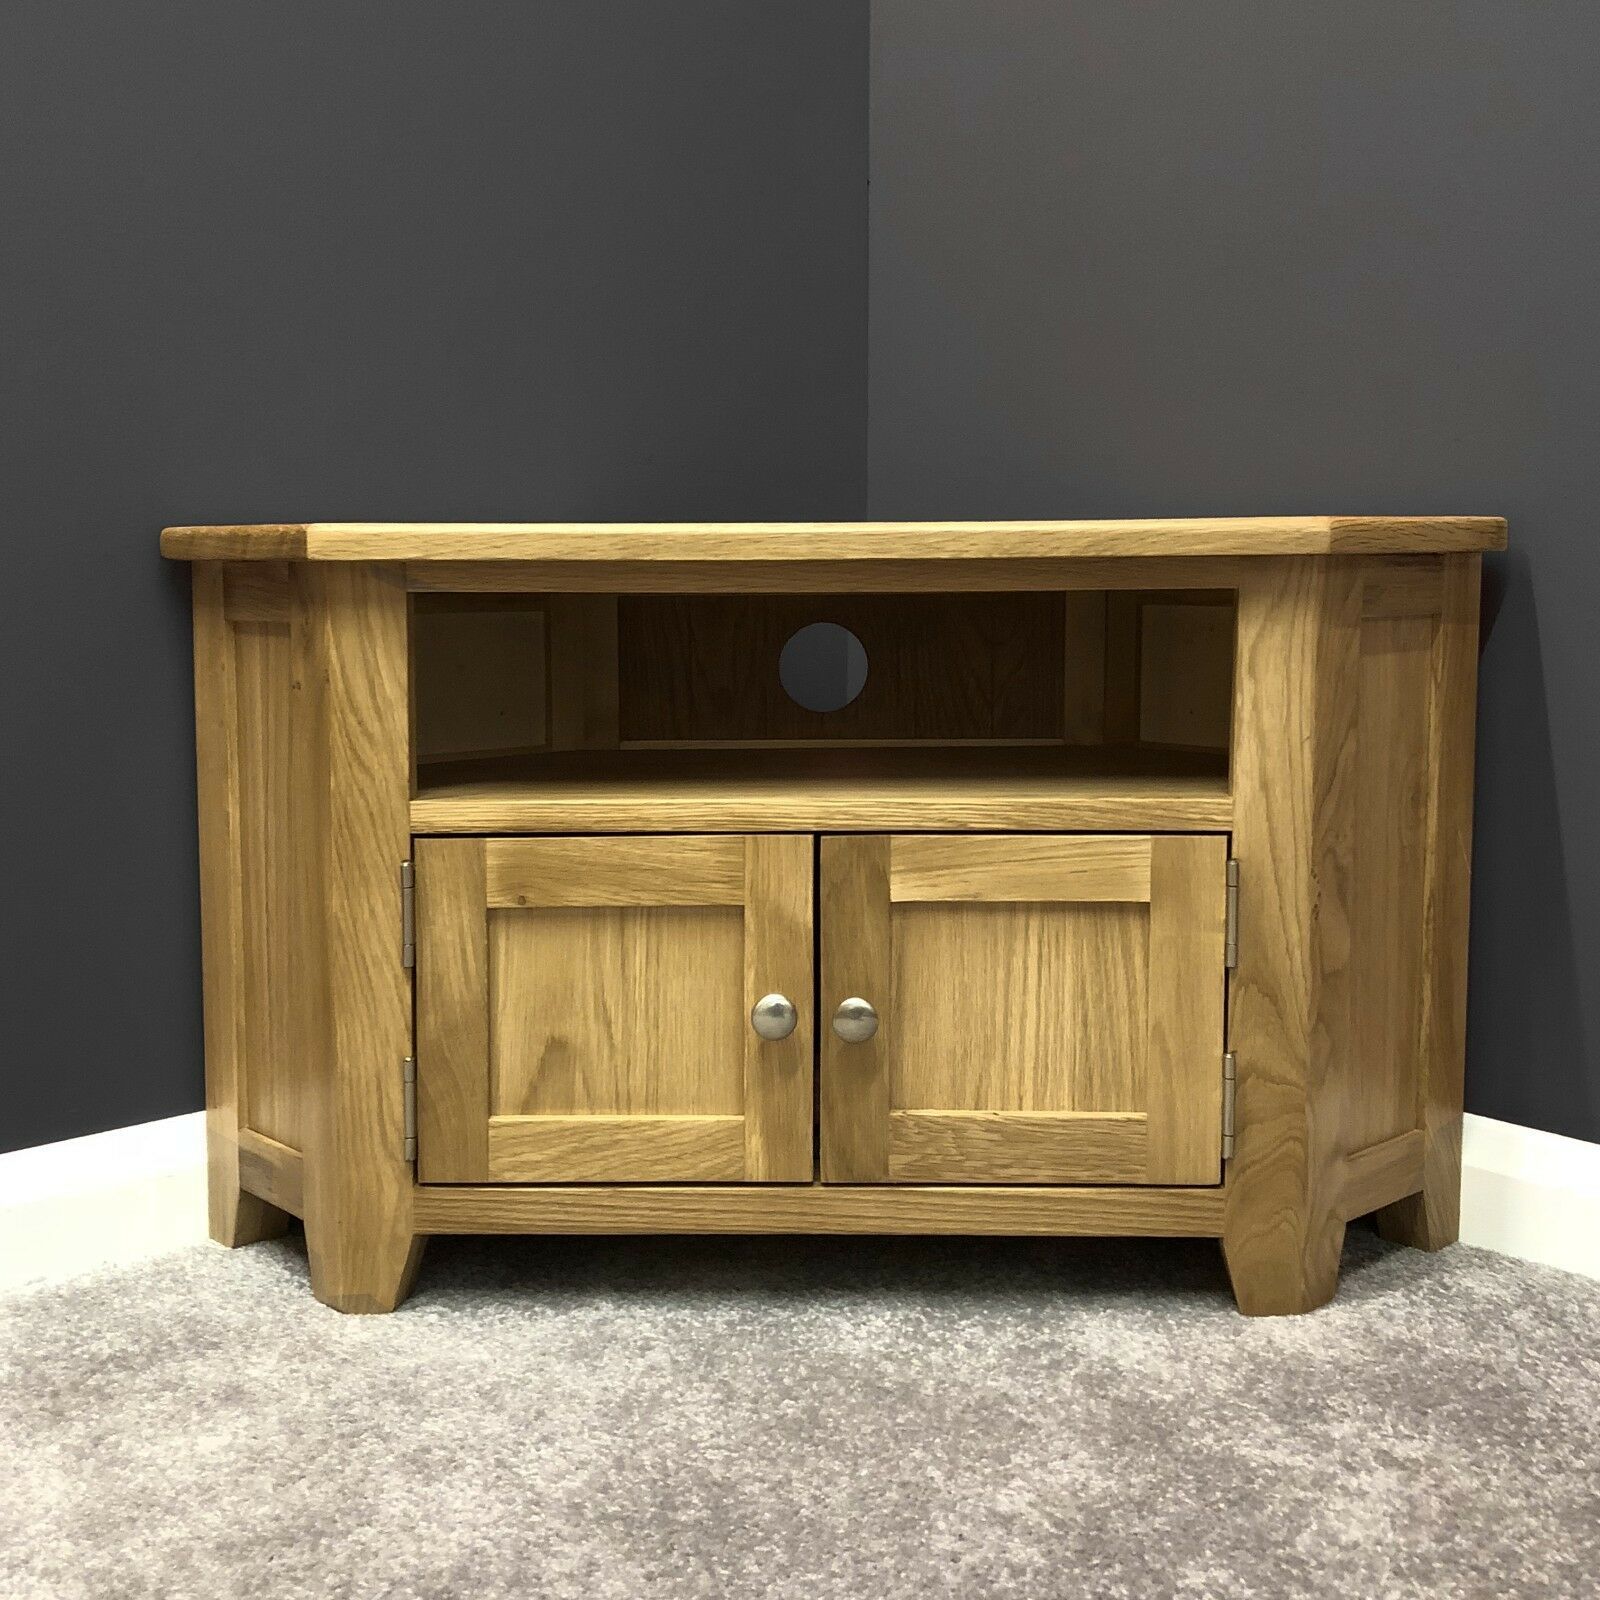 Oak Corner Tv Stand With Doors / Solid Wood Television Throughout Oak Tv Cabinets With Doors (View 2 of 15)